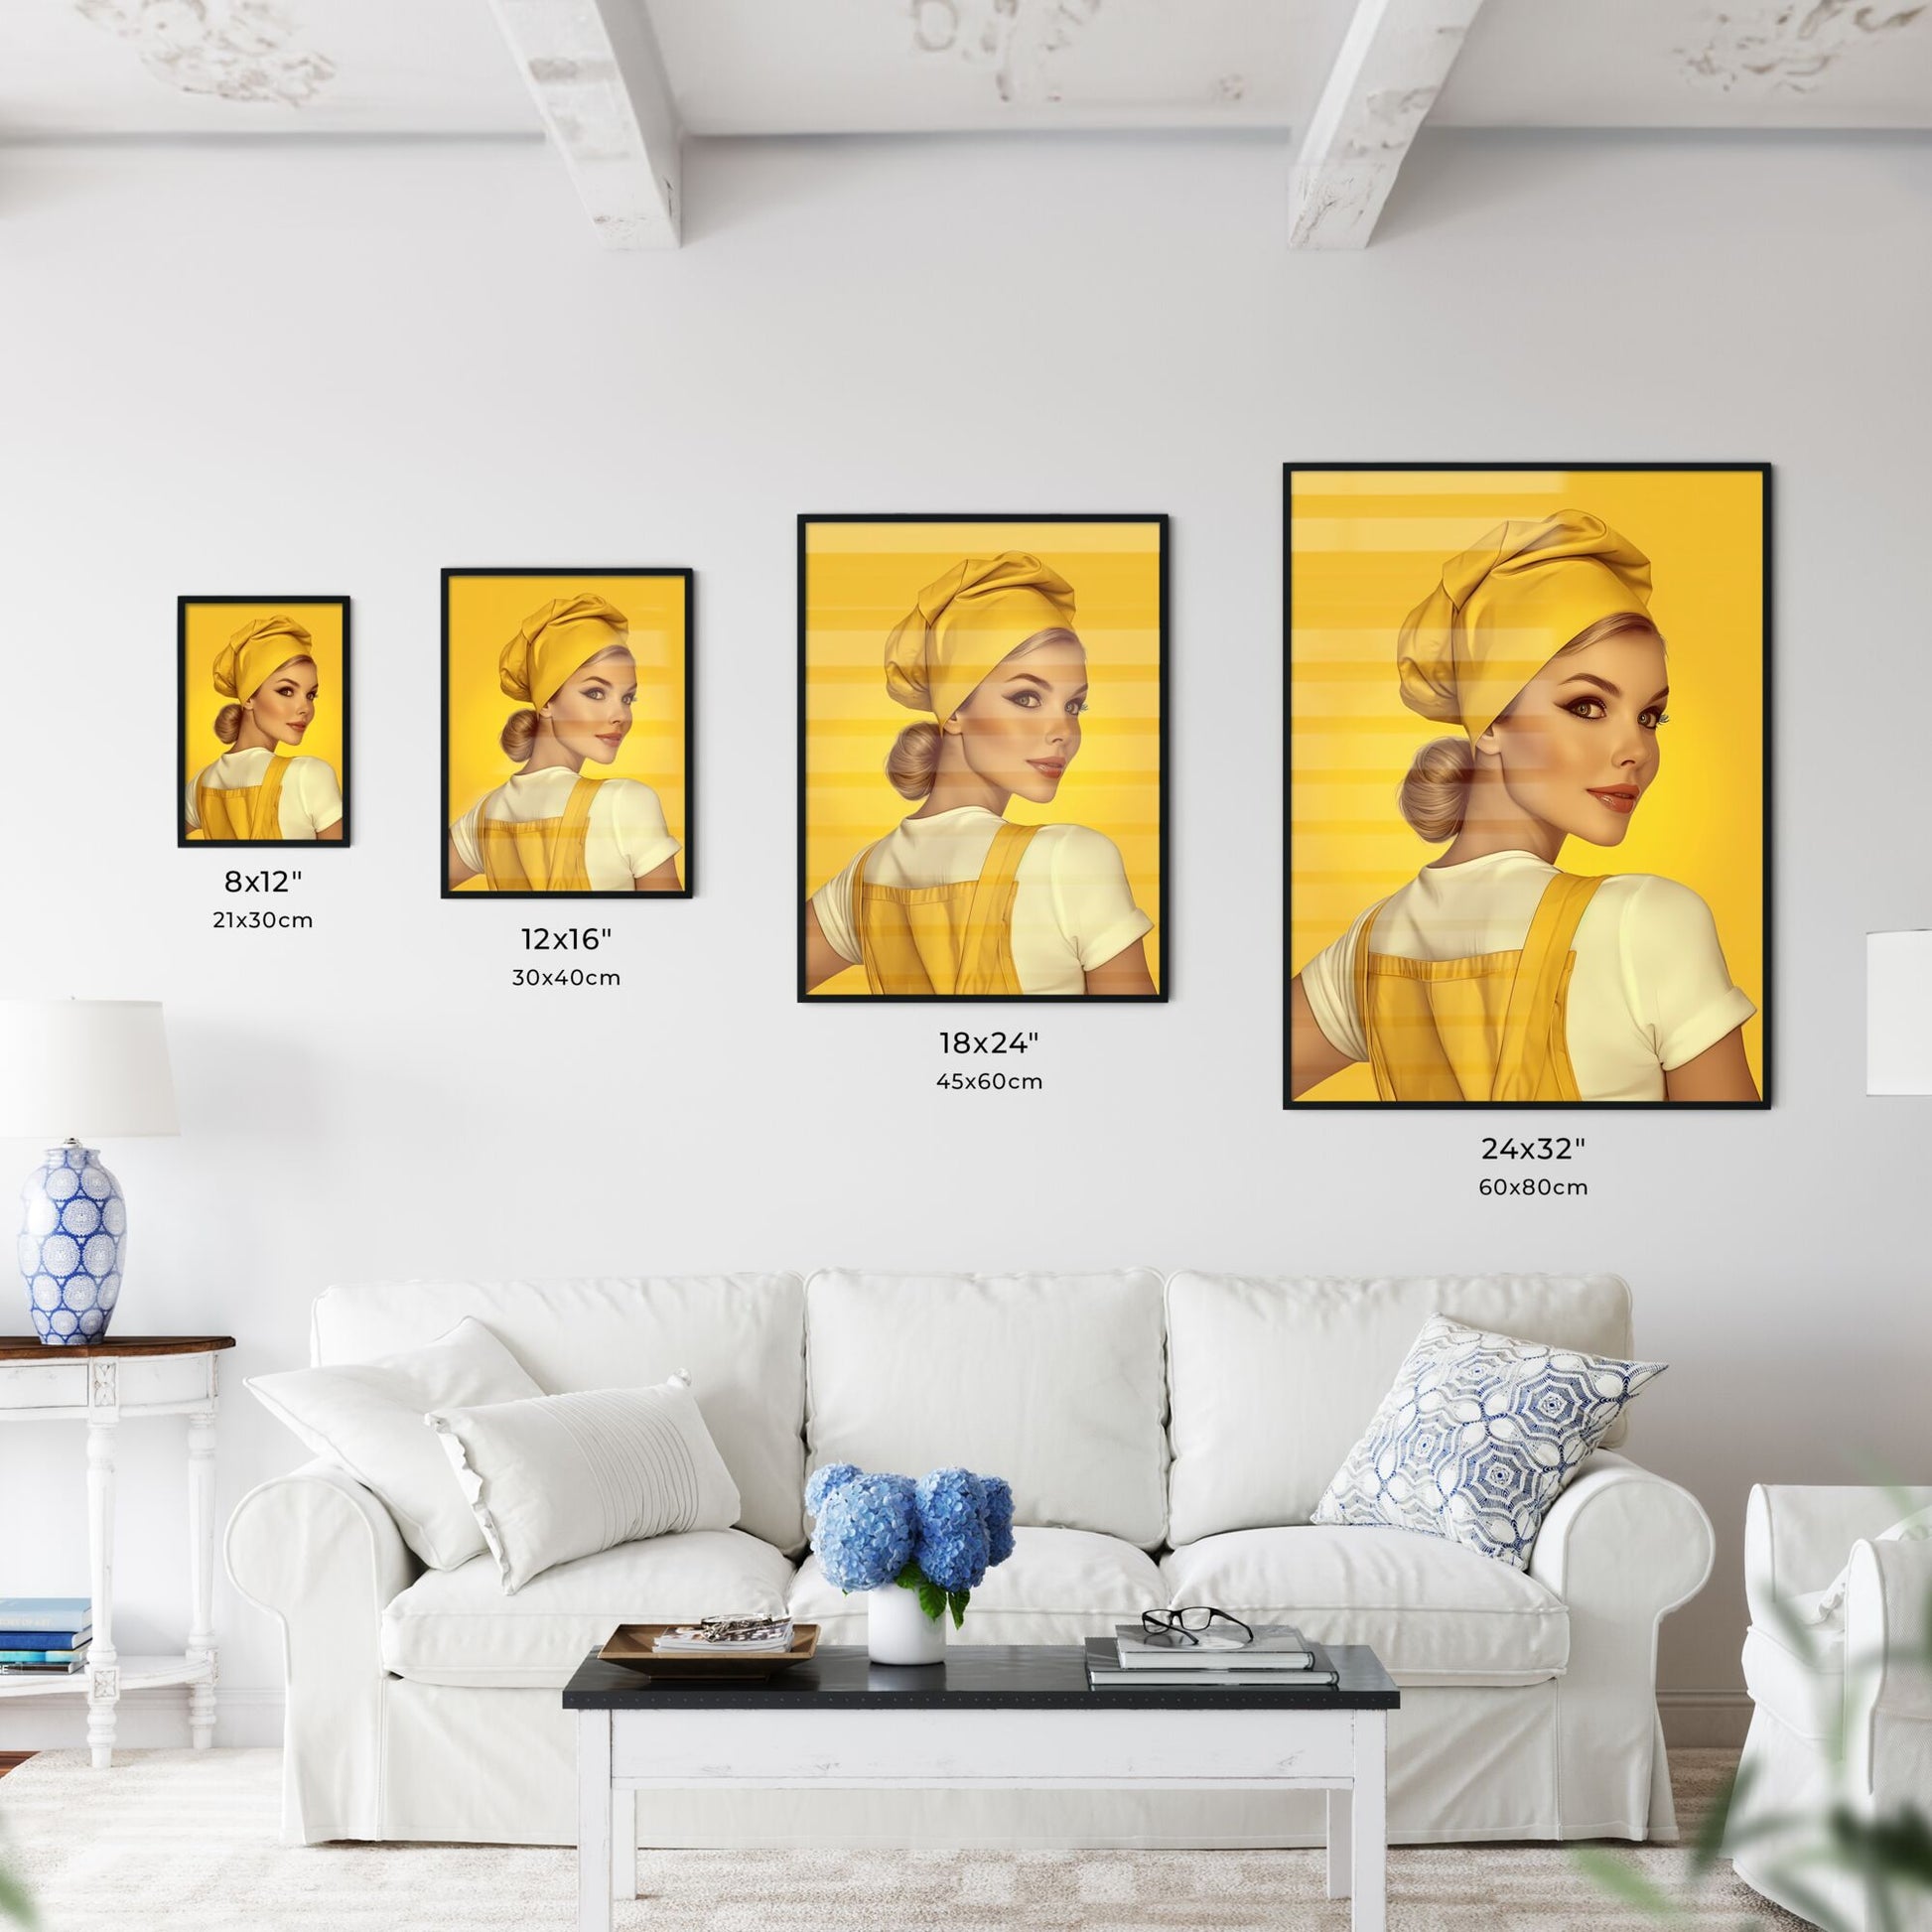 Amazing pin up girl illustration, full body character - Art print of a woman wearing a yellow apron and a yellow hat Default Title